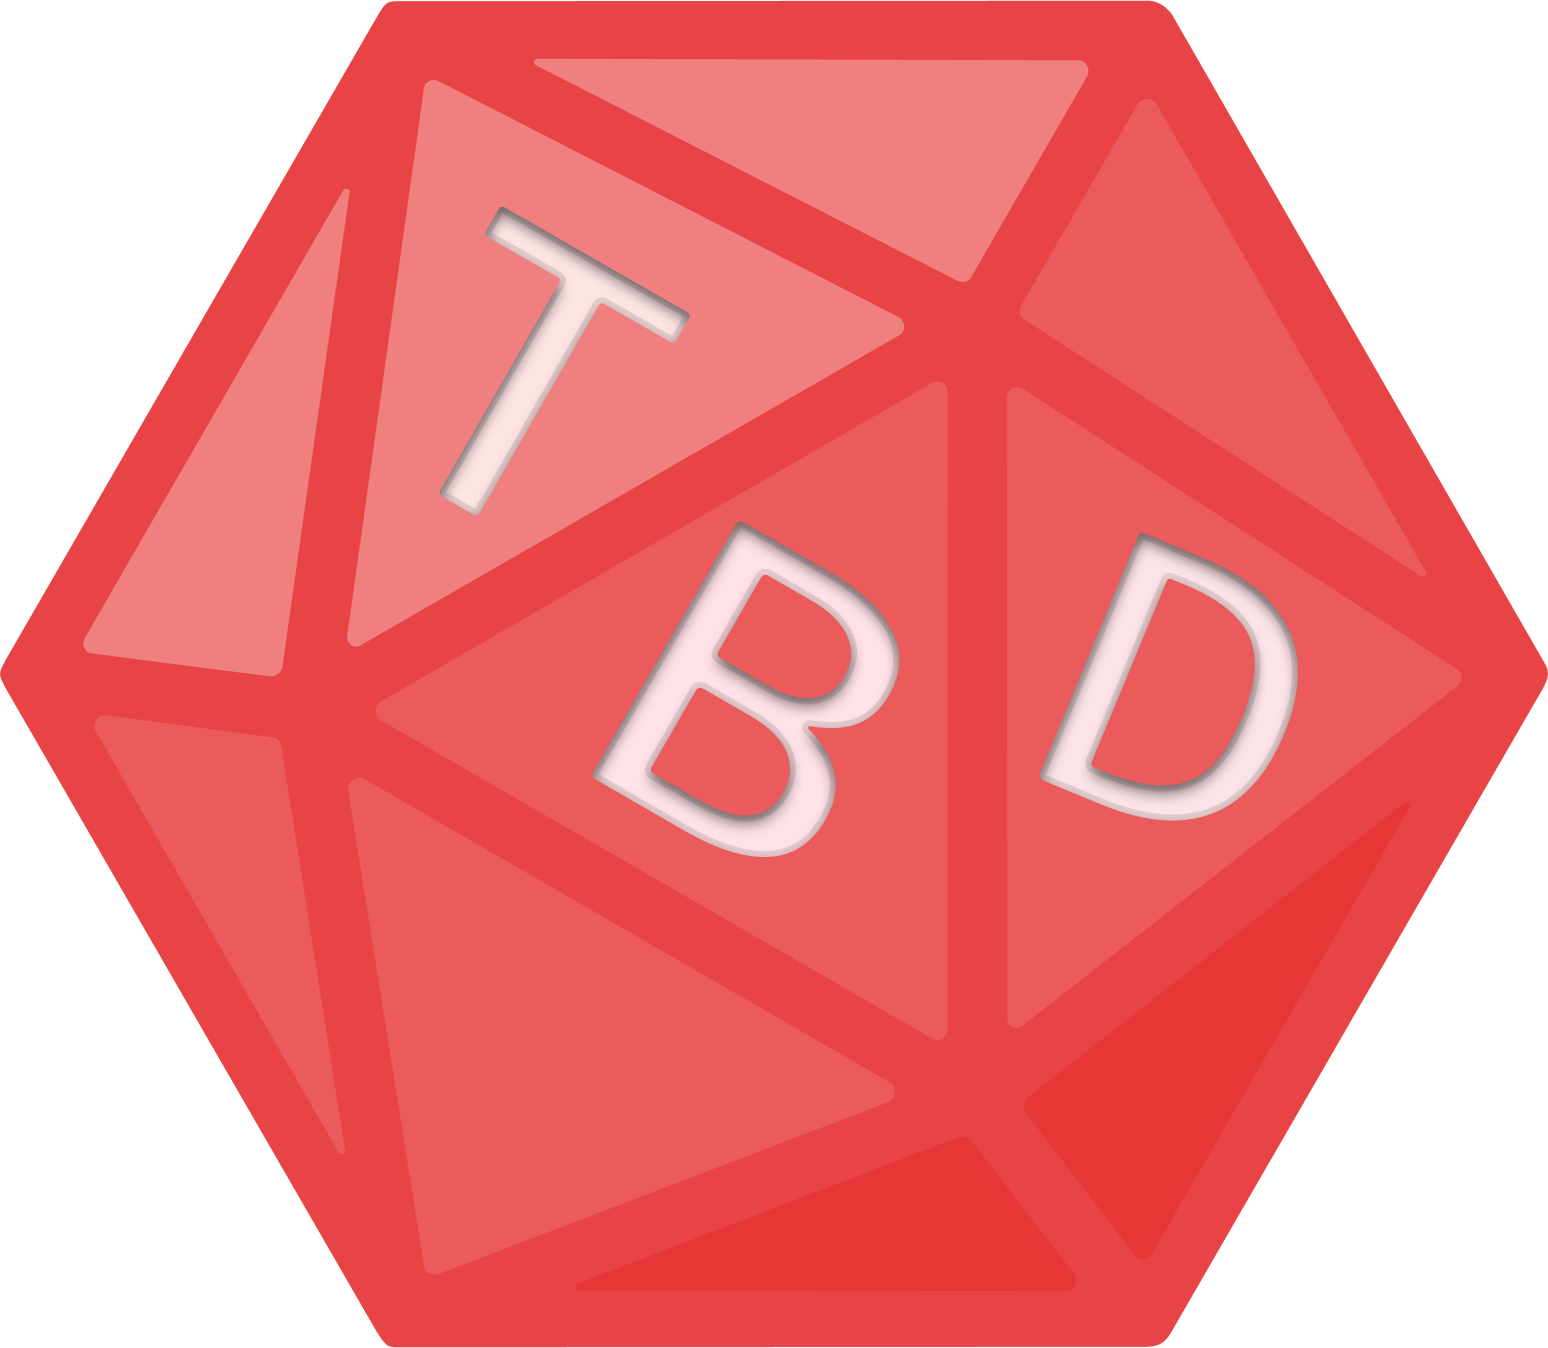 A 20-sided die with "TBD" on the visible faces of the die which is the logo for Dungeons and To Be Determined.